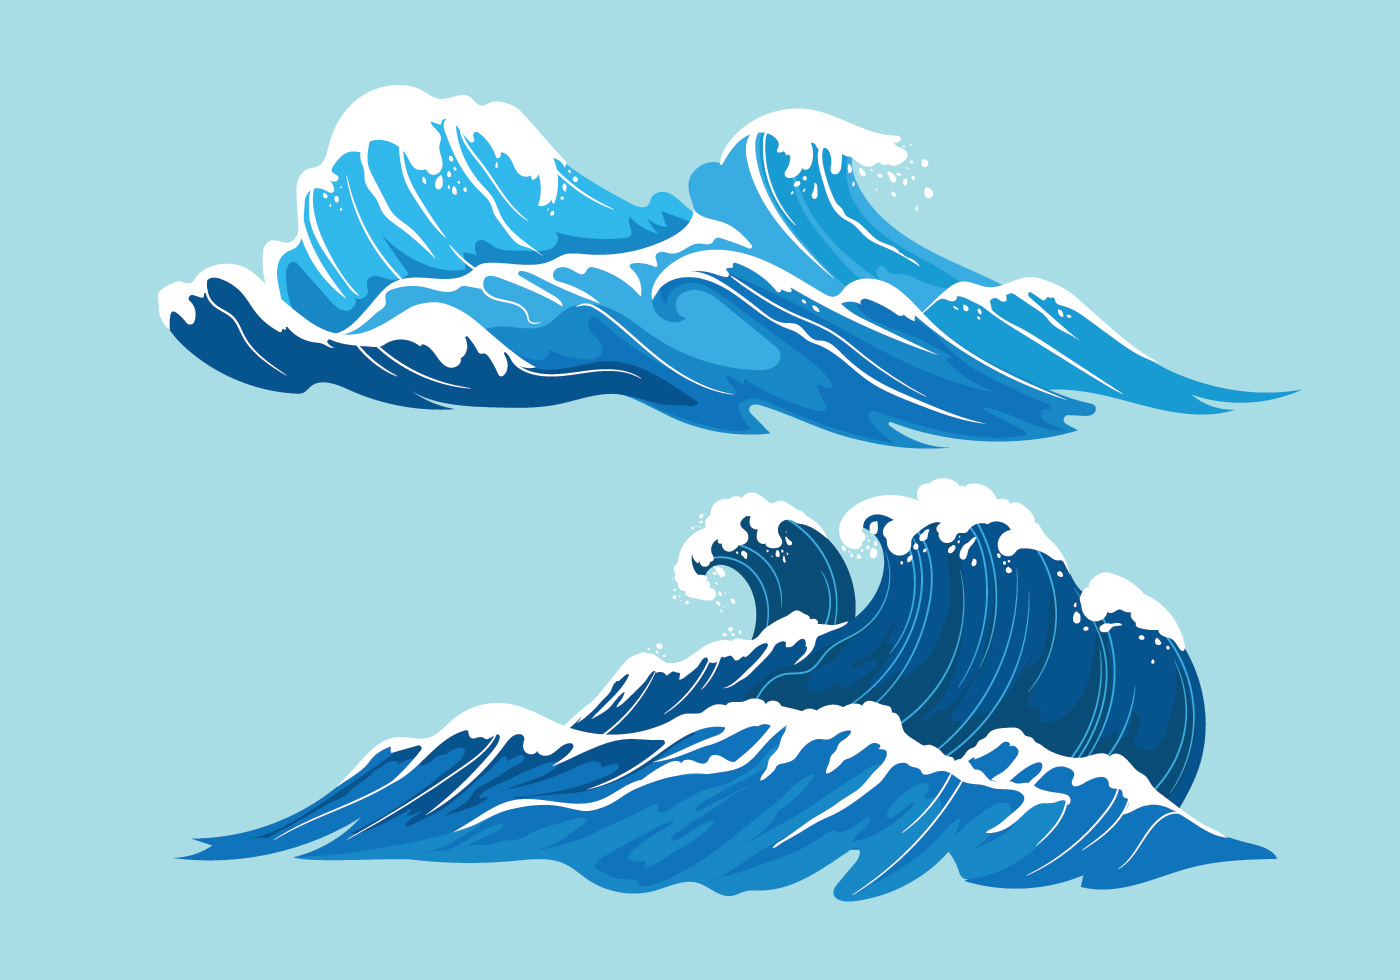 Waves free vector.